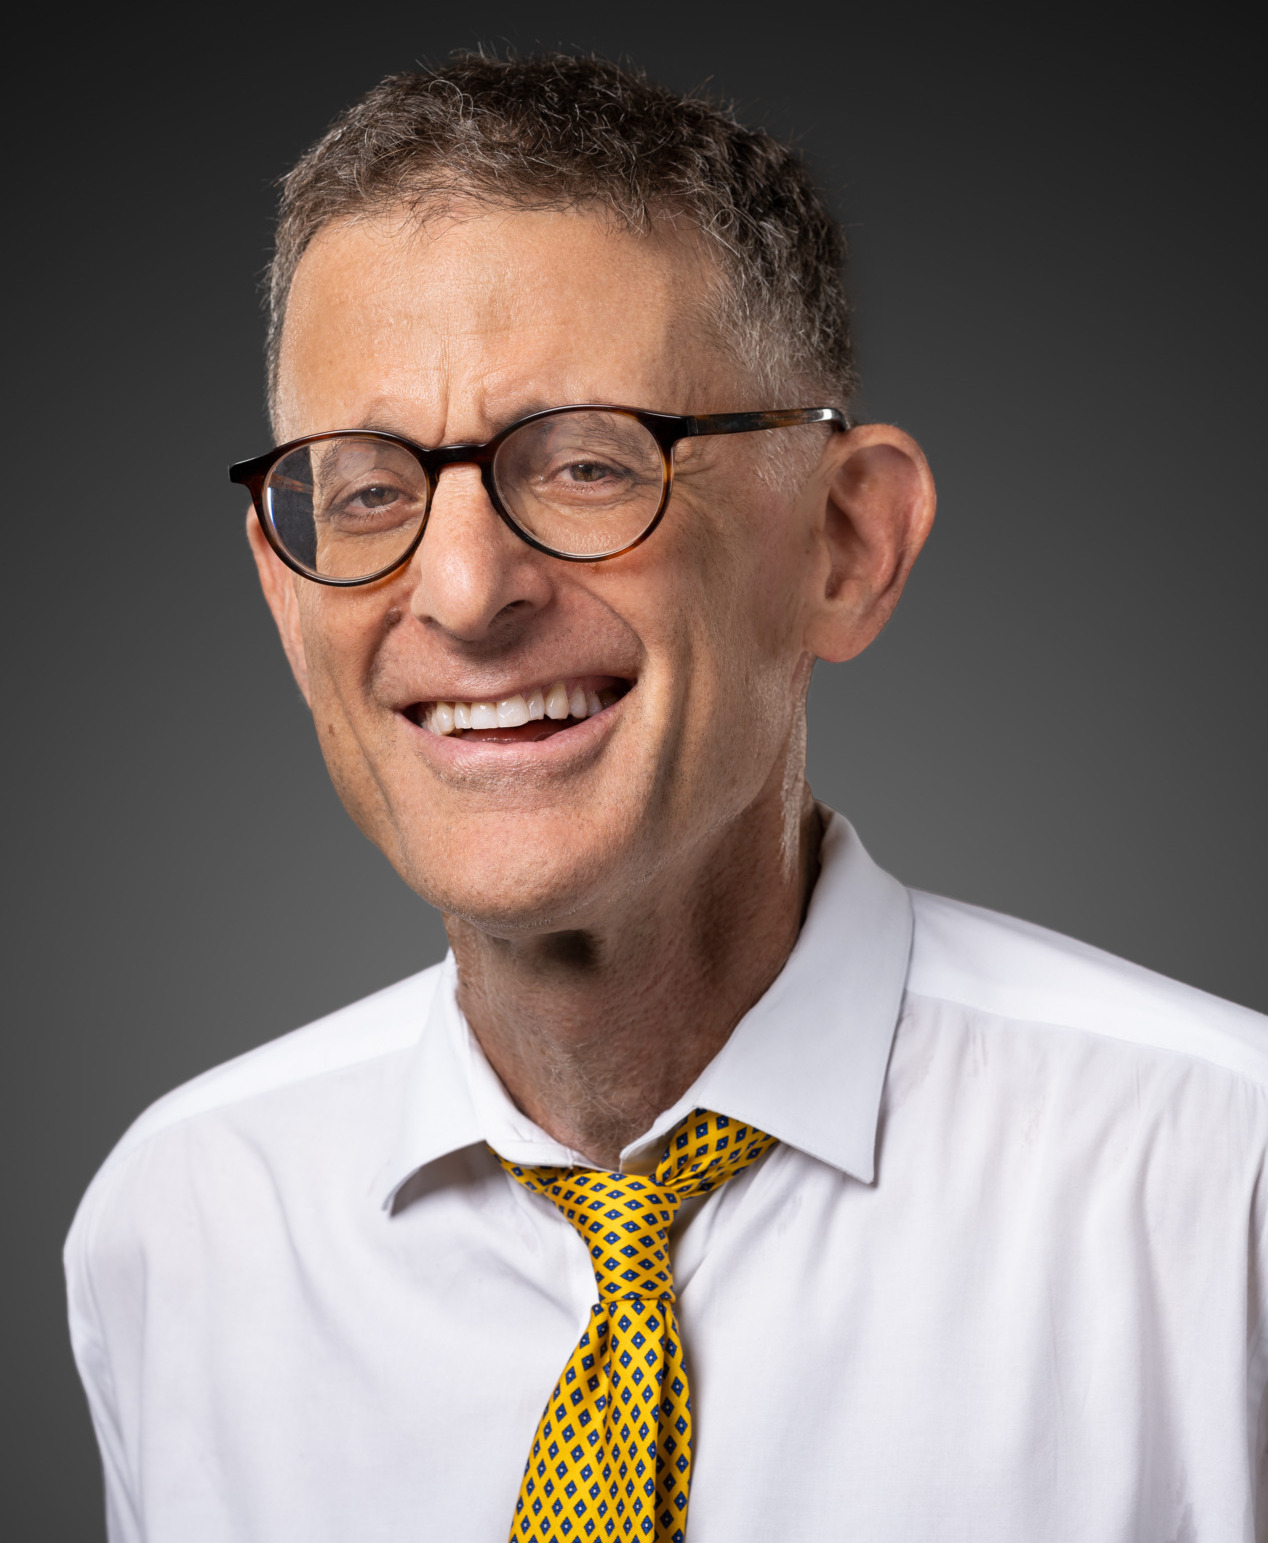 Book bans: Headshot of man with graying brown hair and dark-framed glasses in white shirt with gold tie smiling into camera